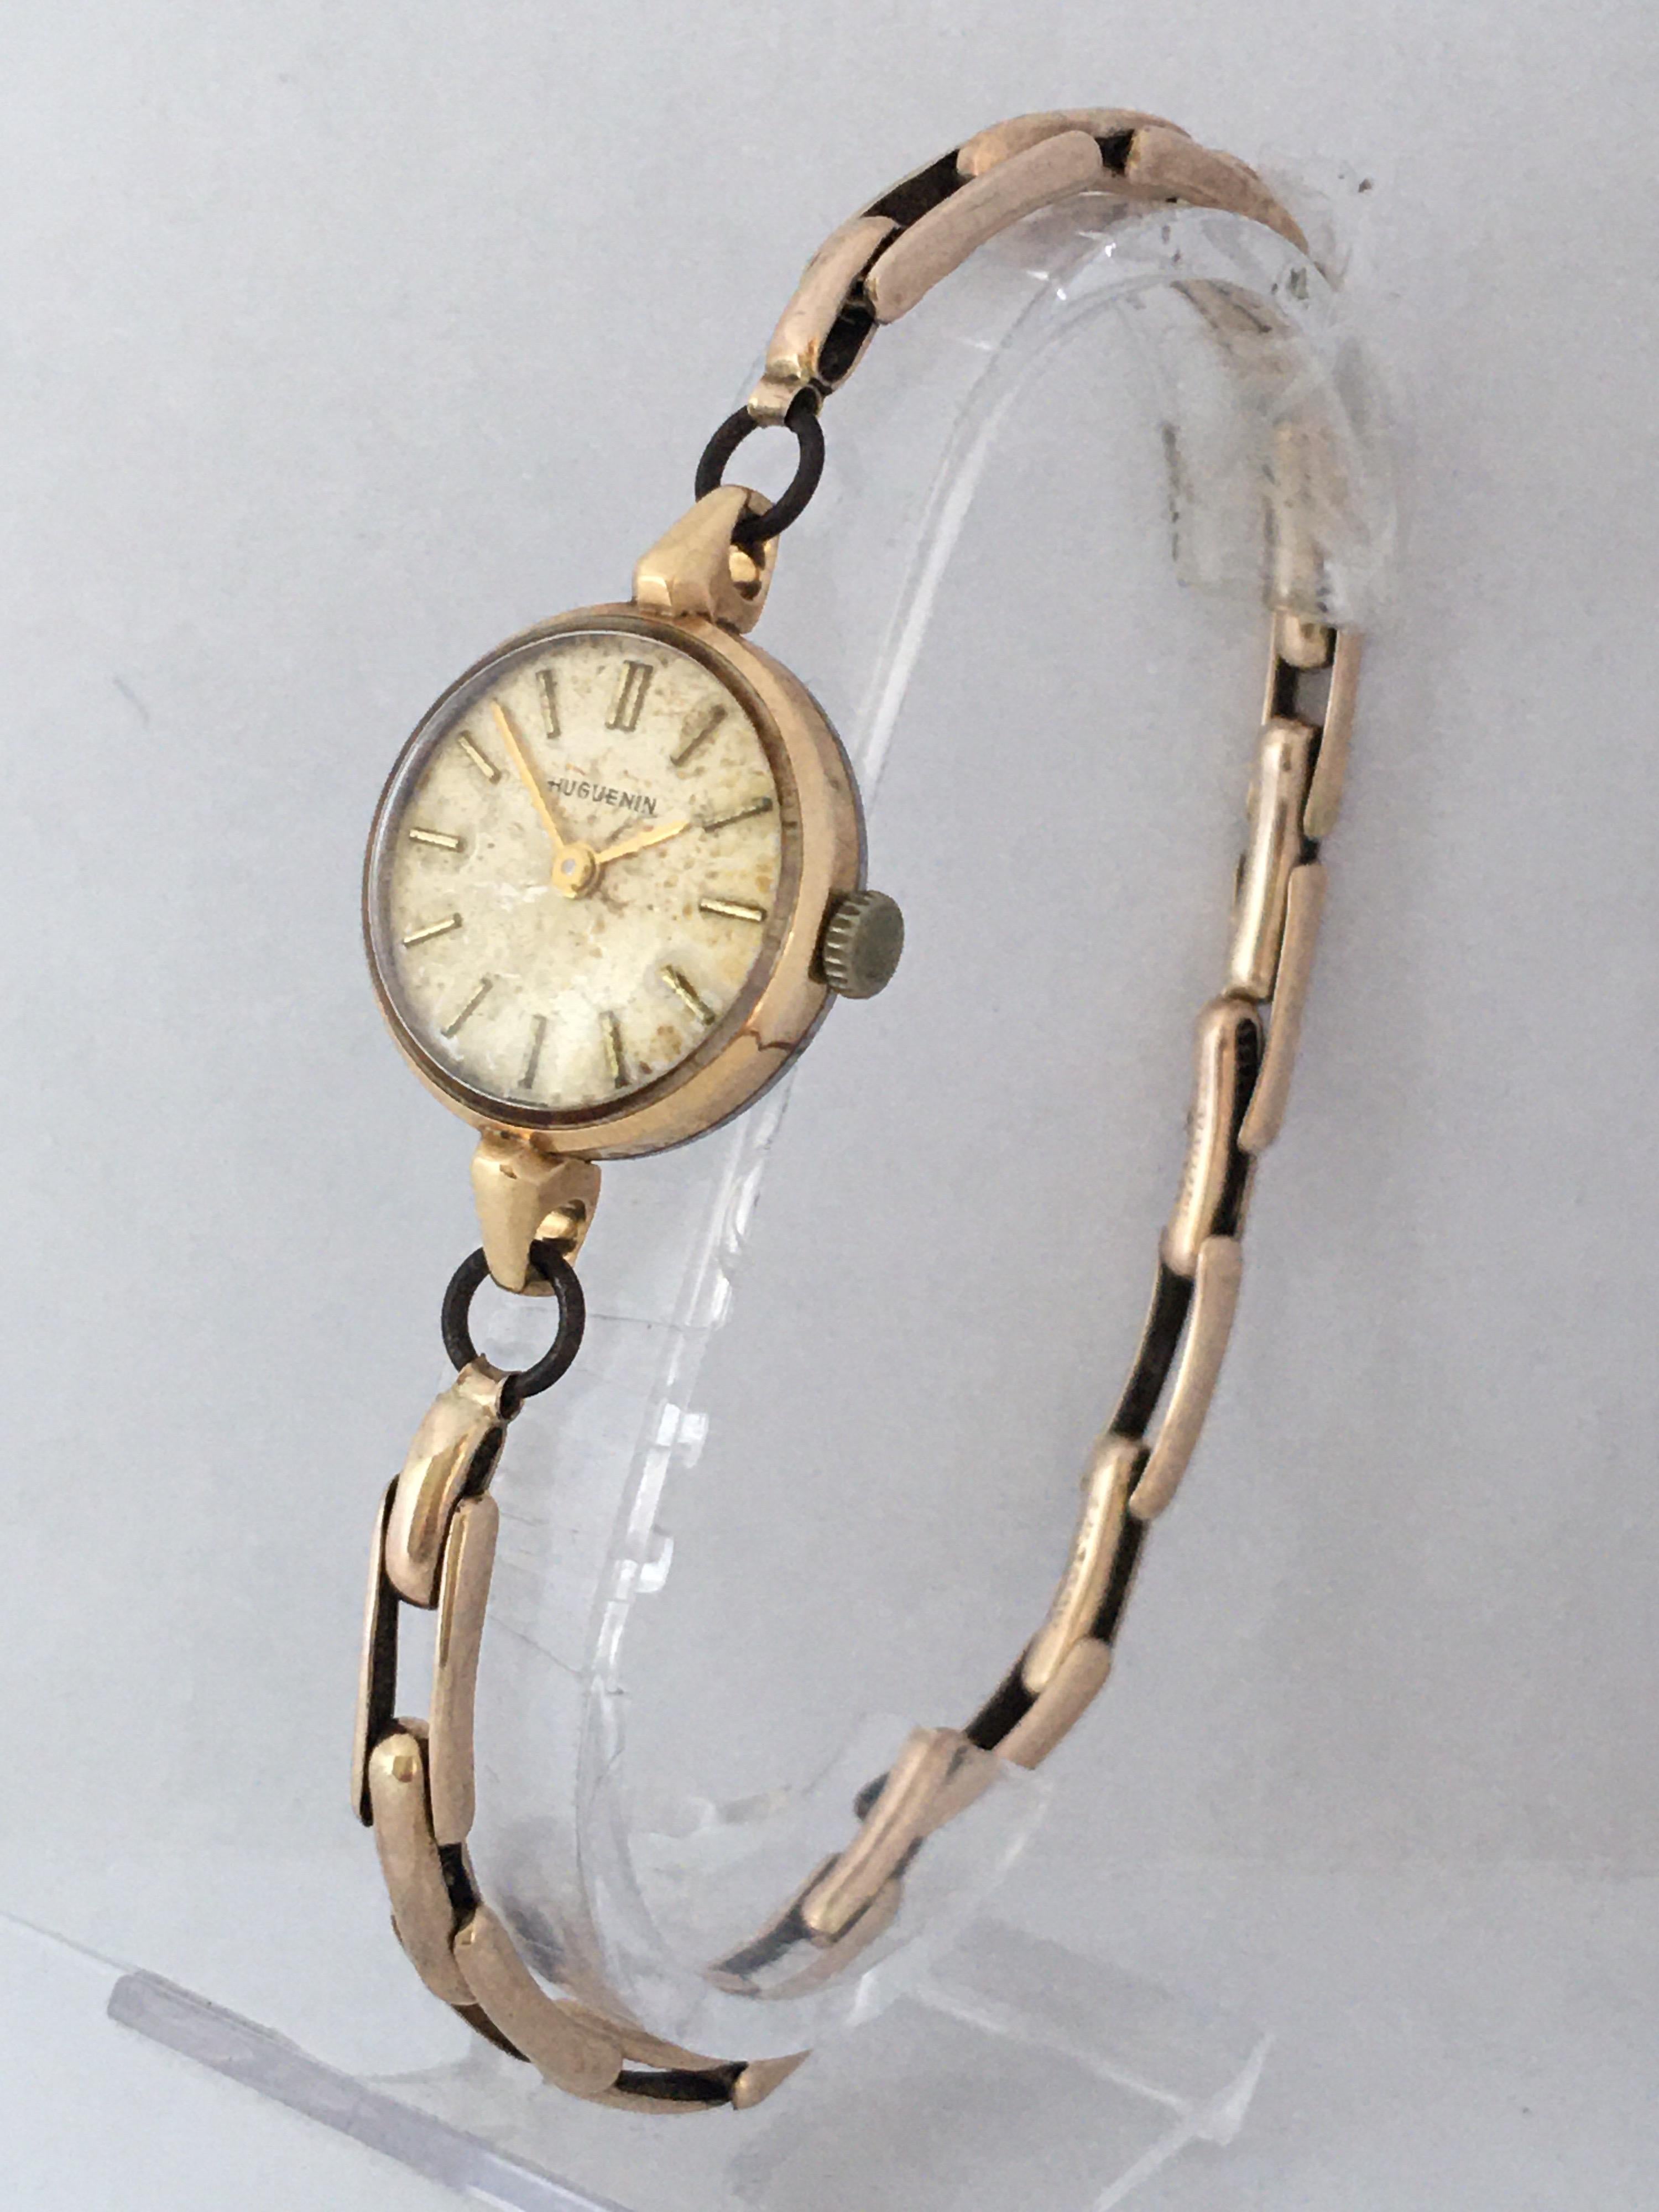 Vintage 1960s Ladies Gold-Filled Mechanical Watch In Fair Condition For Sale In Carlisle, GB